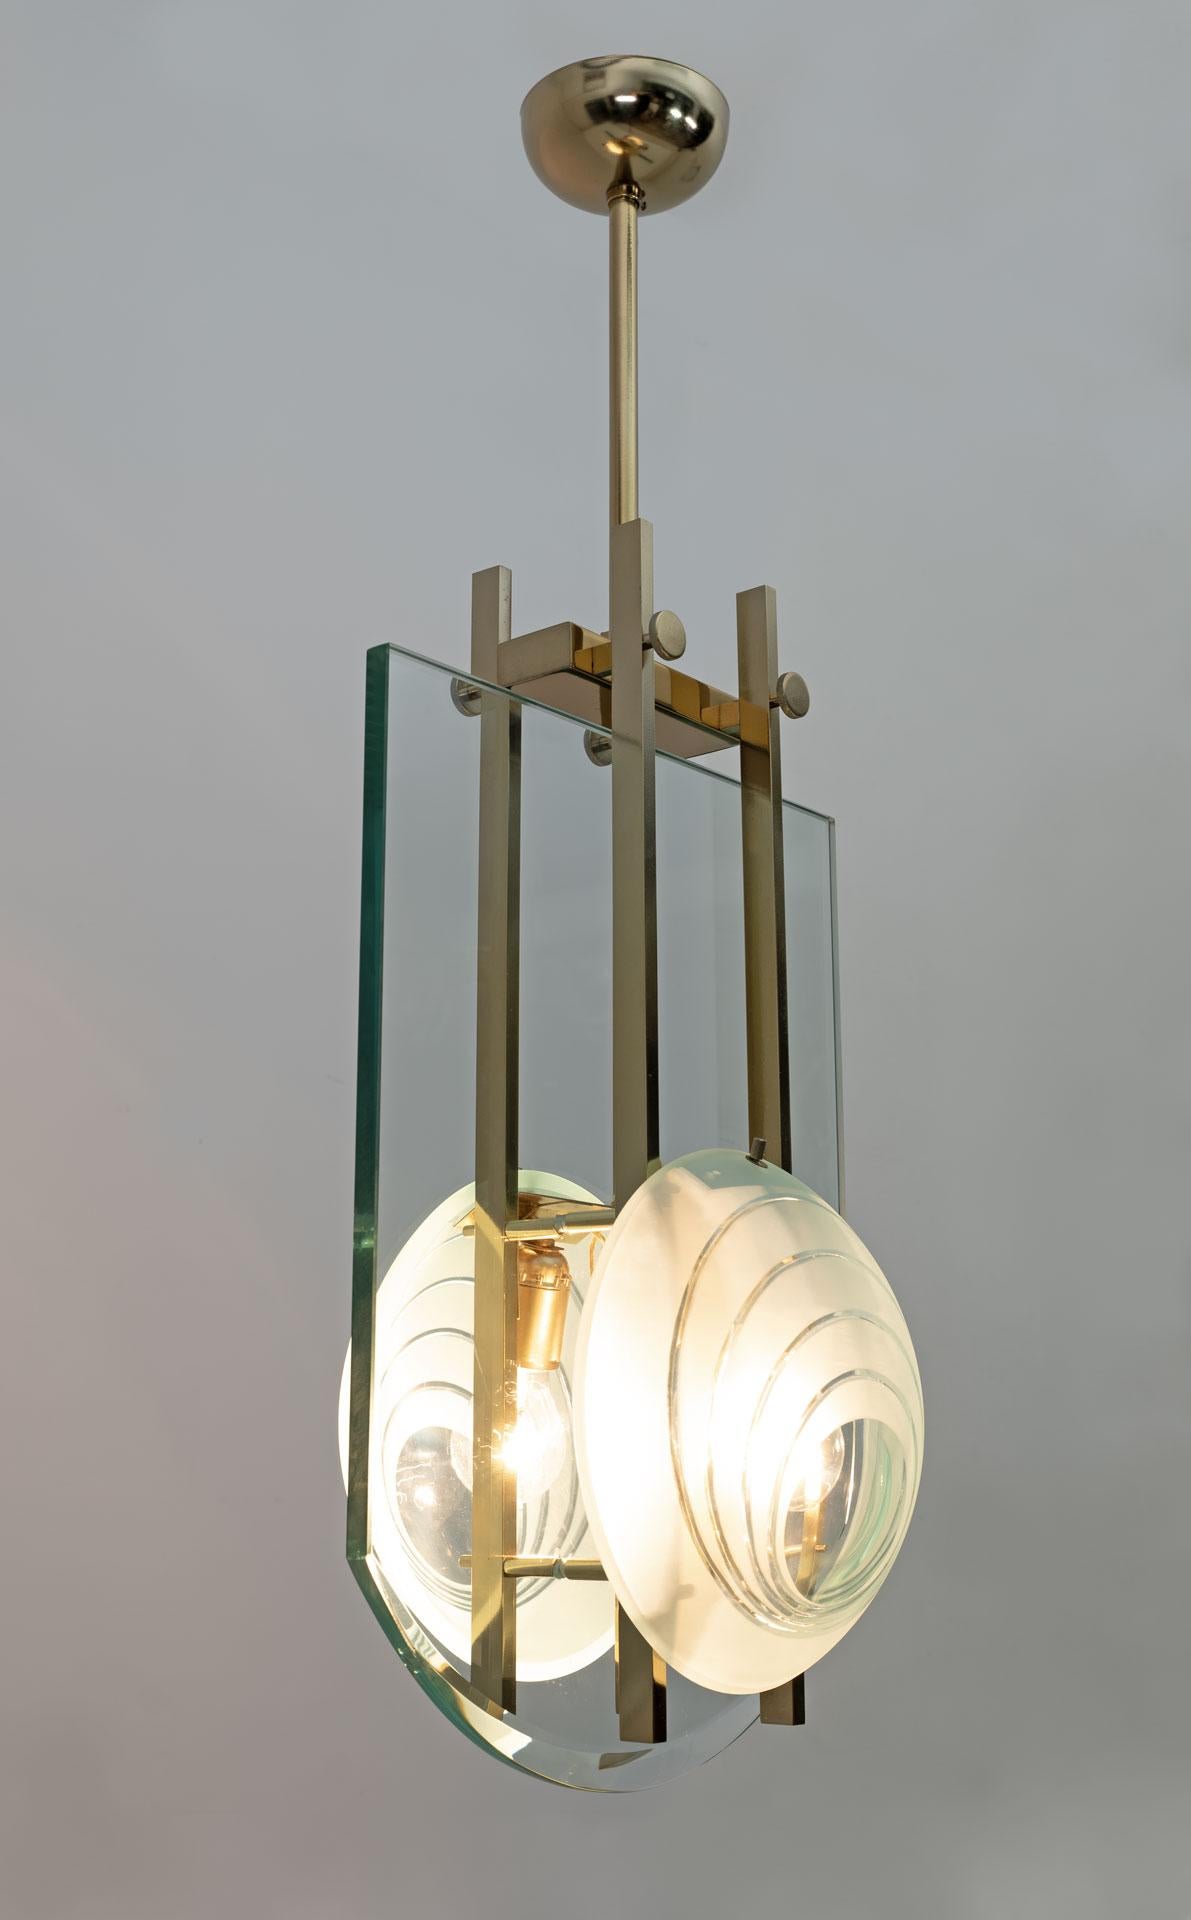 This mid-century modern style ceiling lamp dates back to the 1970s and was produced in Italy by Galotti & Radice, in brass and thick crystal.
Bring two E27 or E26 bulbs for the United States